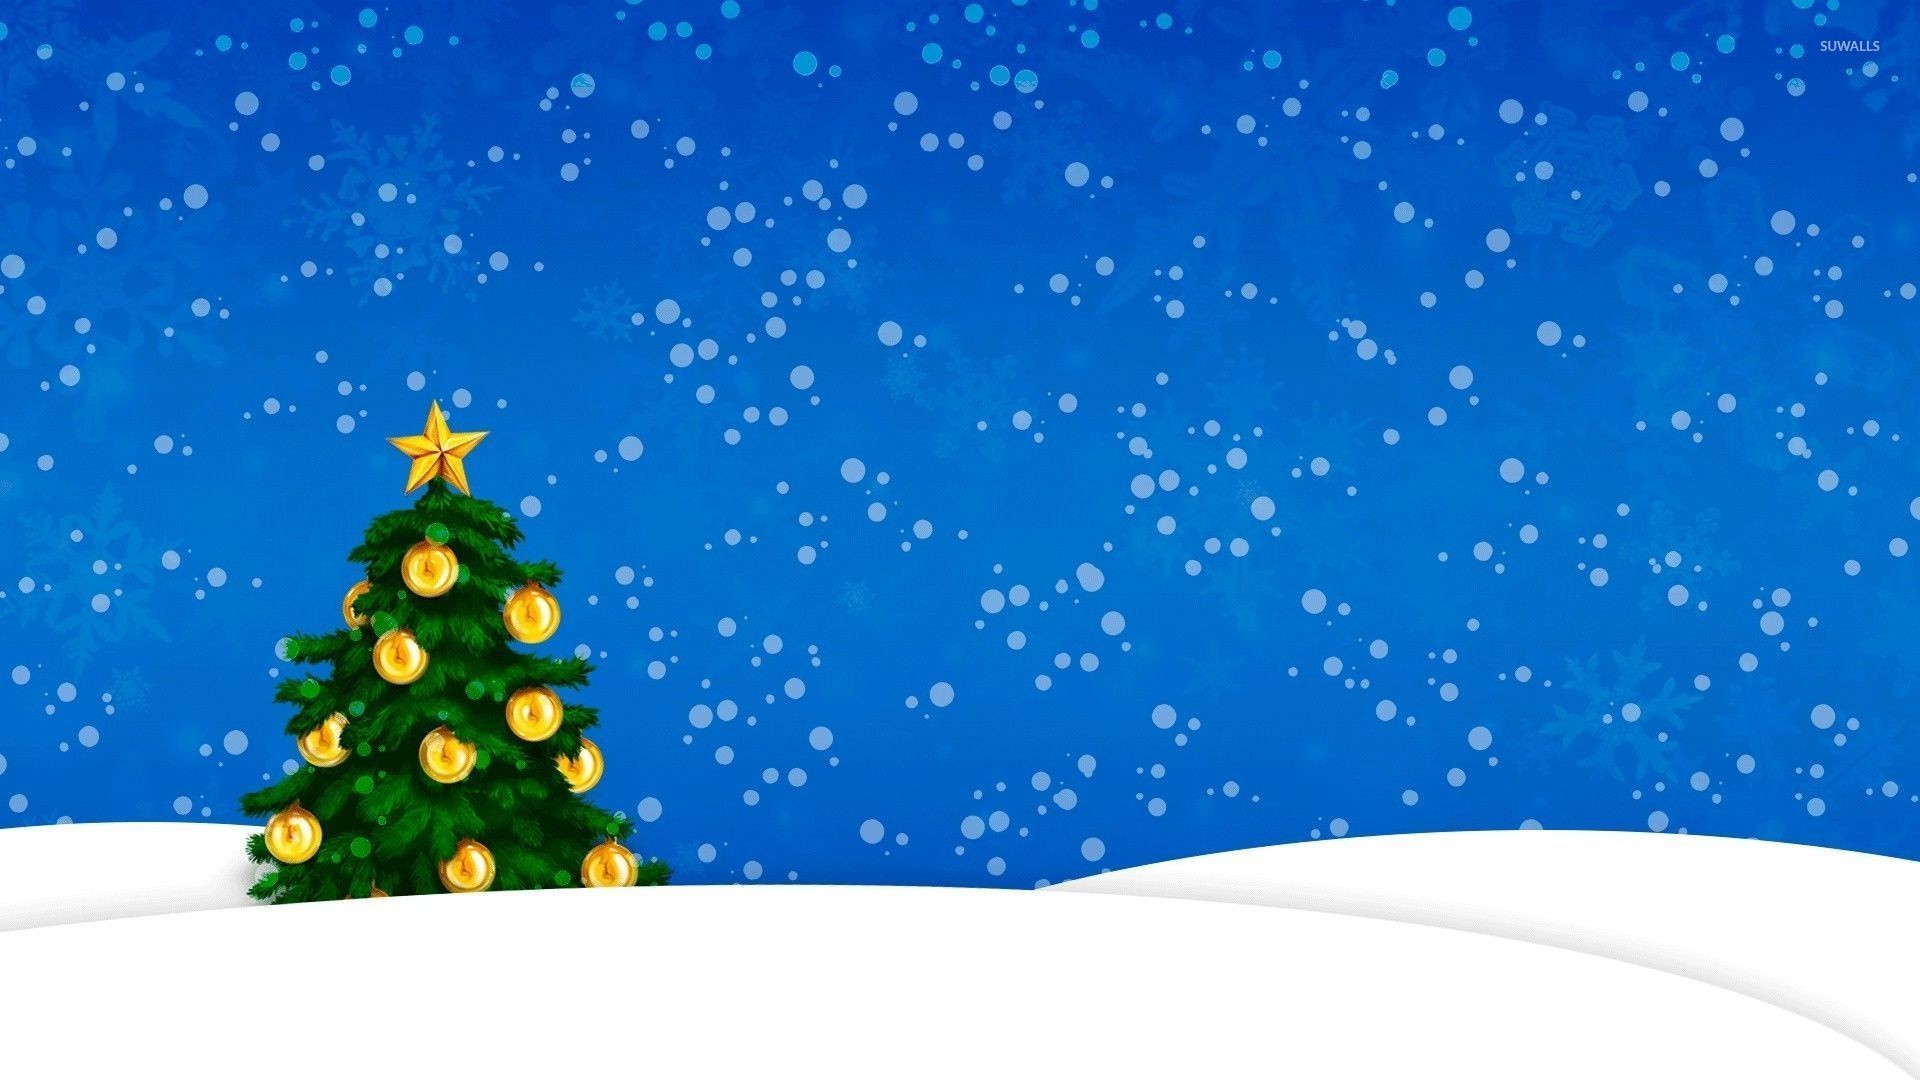 1920x1080 Snow falling on the golden Christmas tree wallpaper